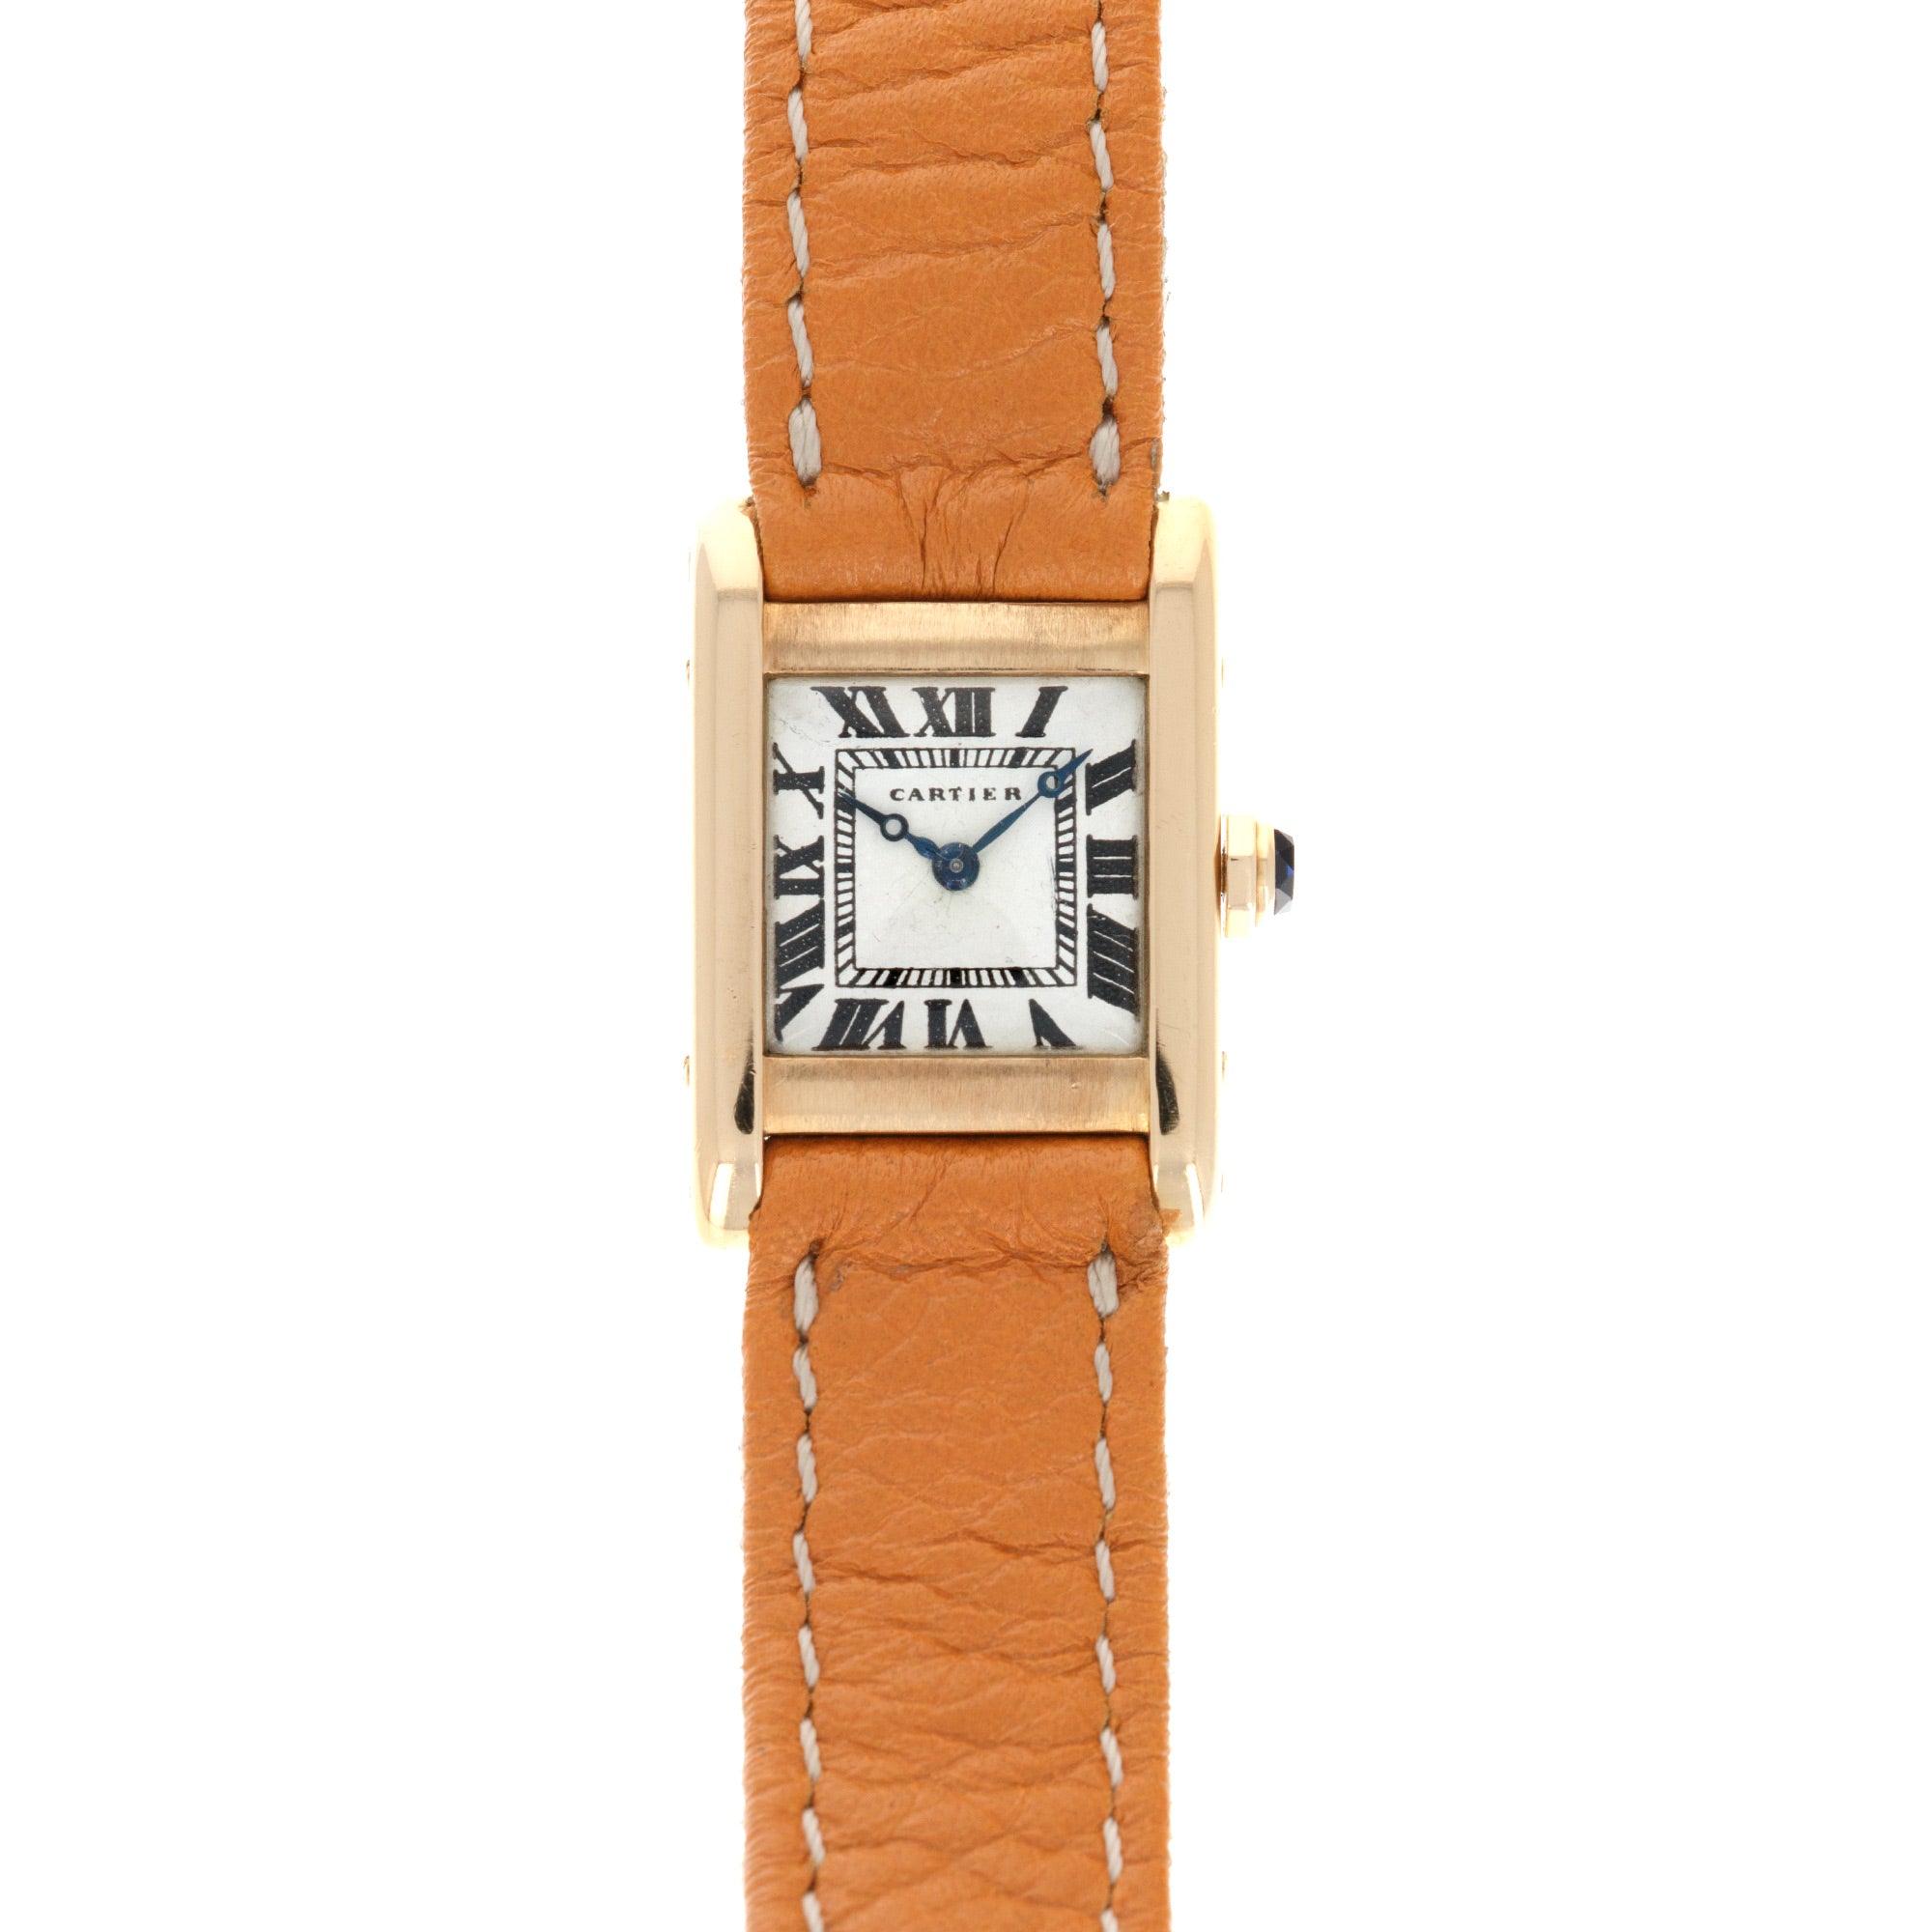 Cartier - Cartier Yellow Gold Tank Normale Watch, Famously Popularized by Jackie Onassis - The Keystone Watches